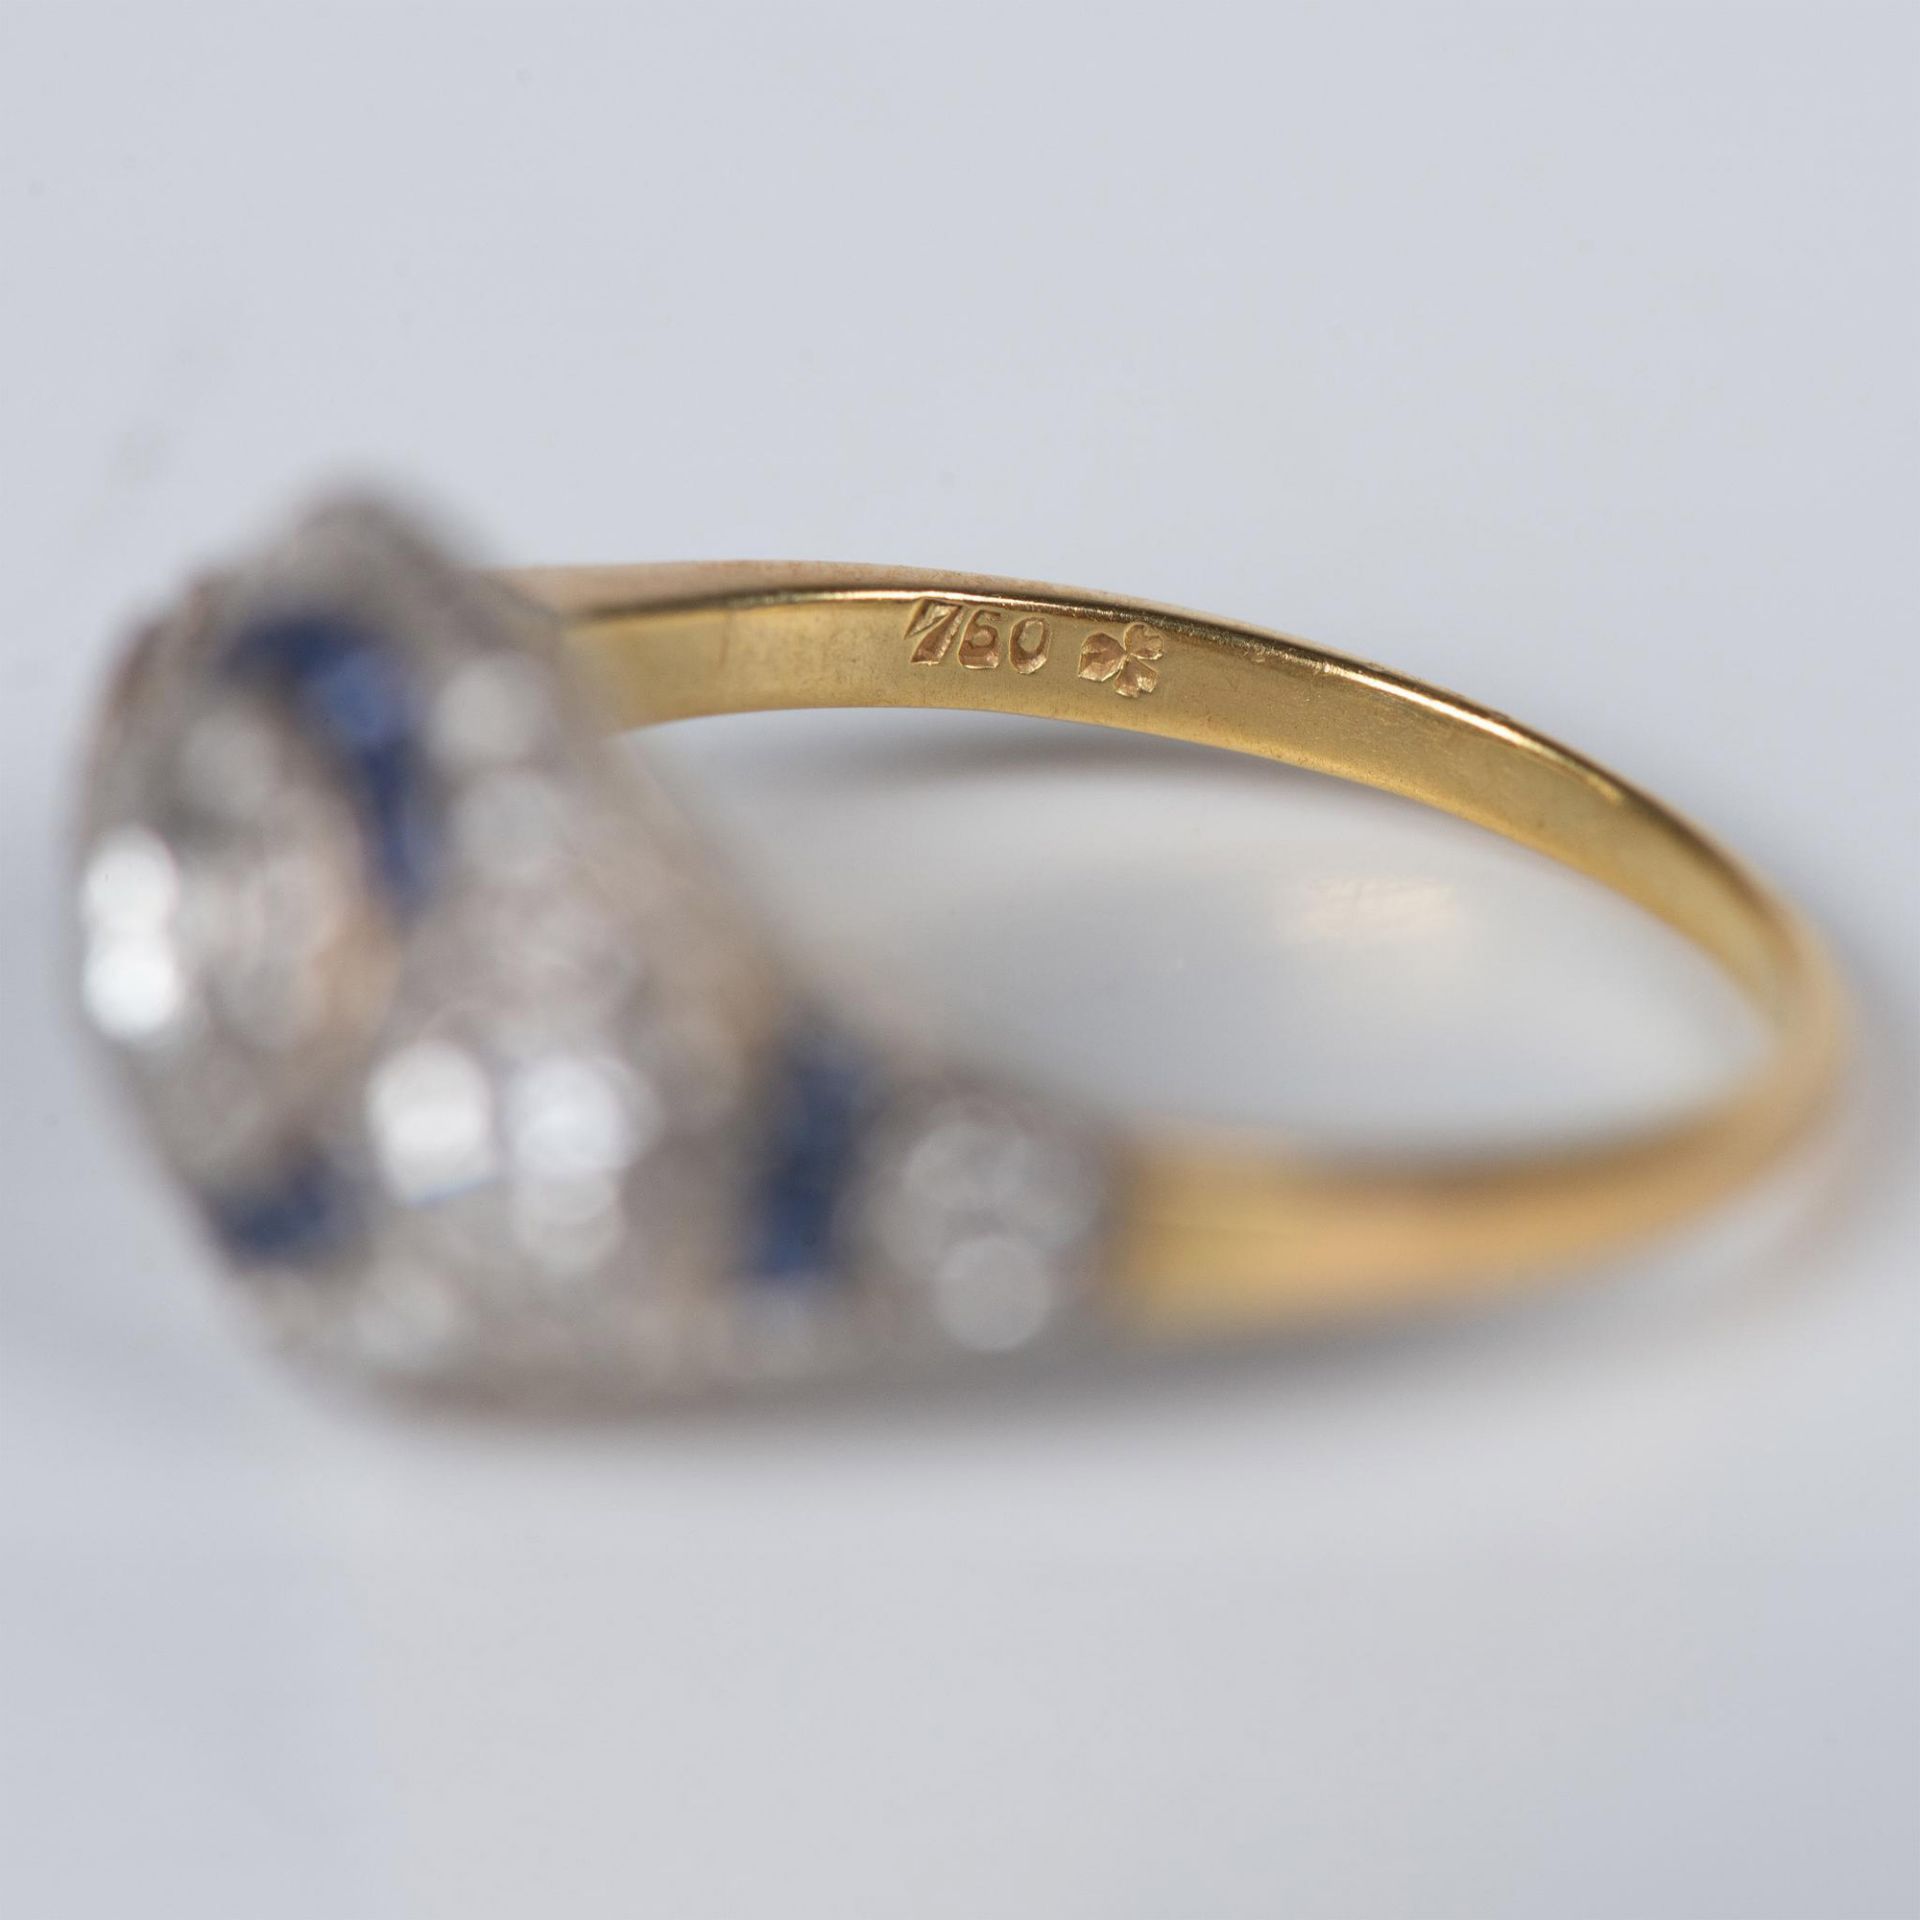 Art Deco 18K Gold, Diamonds and Sapphire Ring - Image 2 of 8